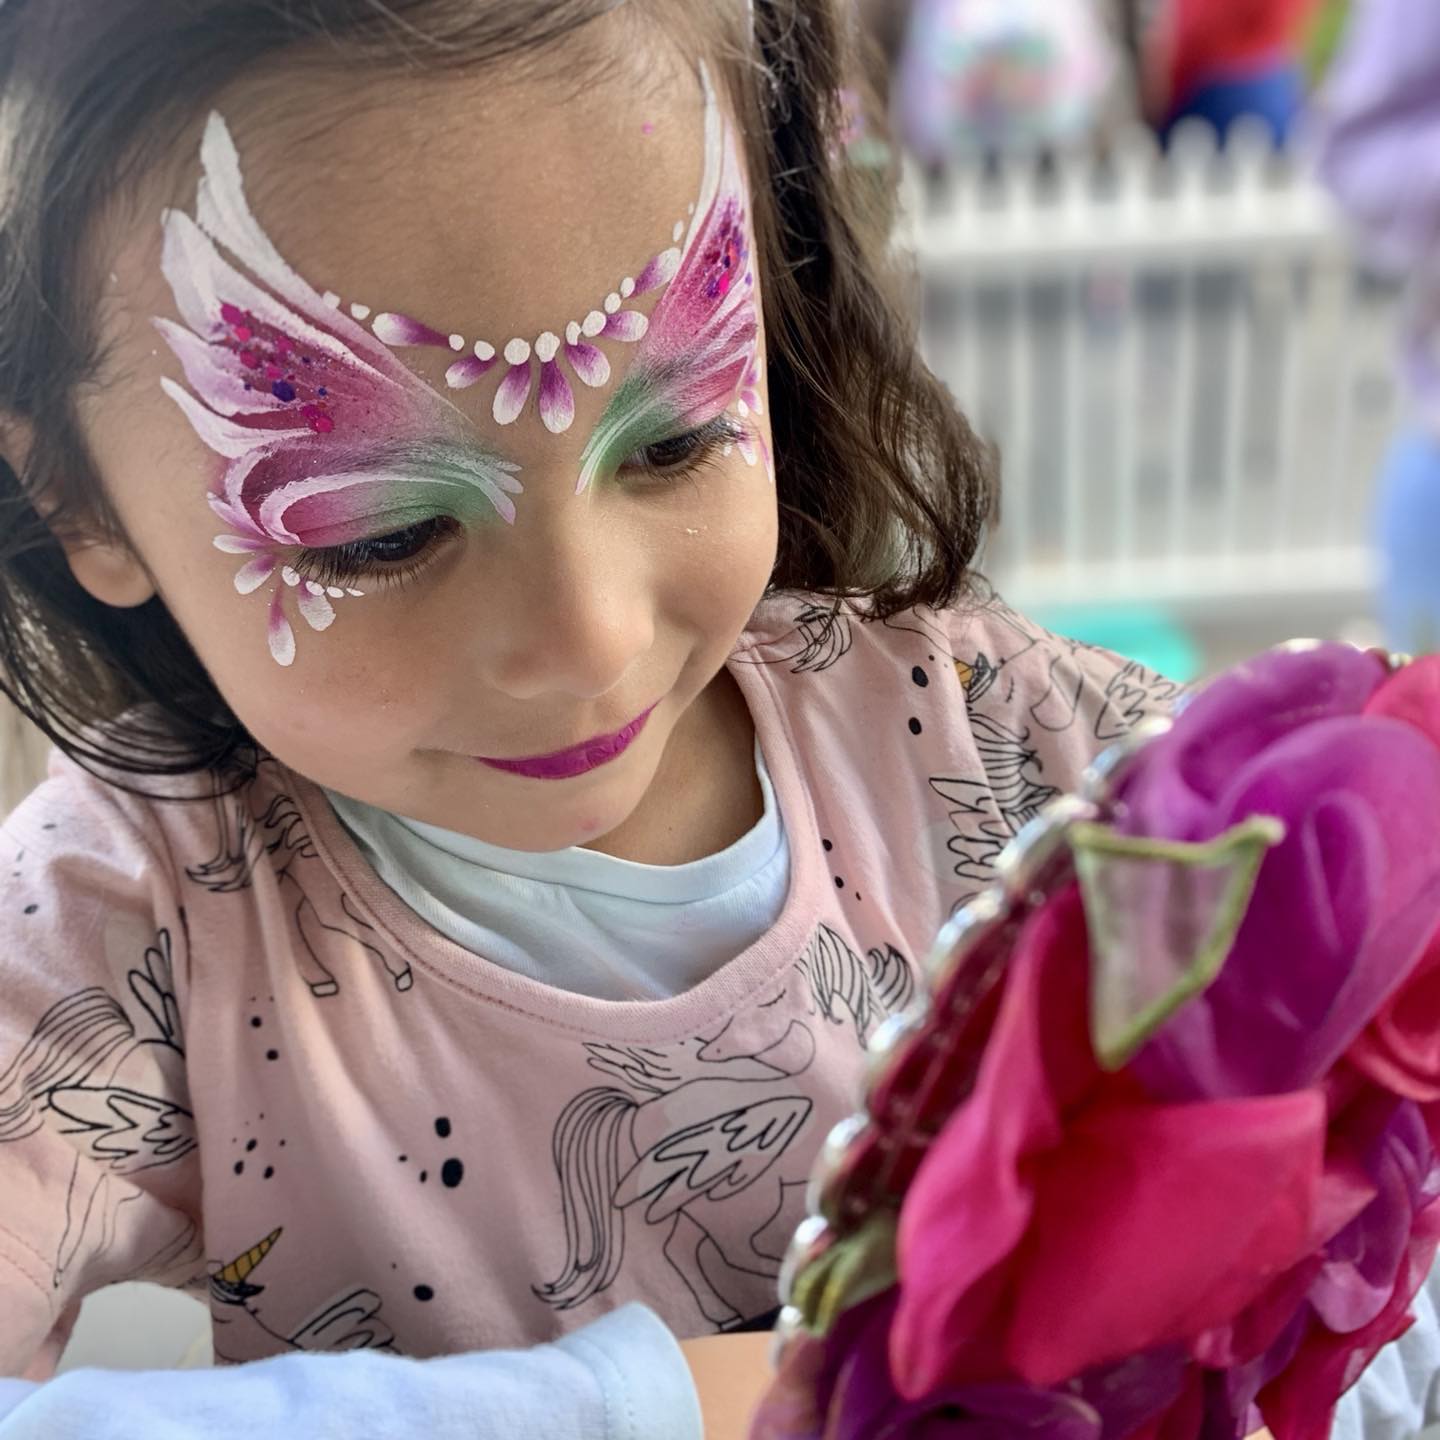 Fairy princess mirror moment at Docklands Playground event today! #facepaintingmelbourne #fairyfacepainting #melbournefacepainter #